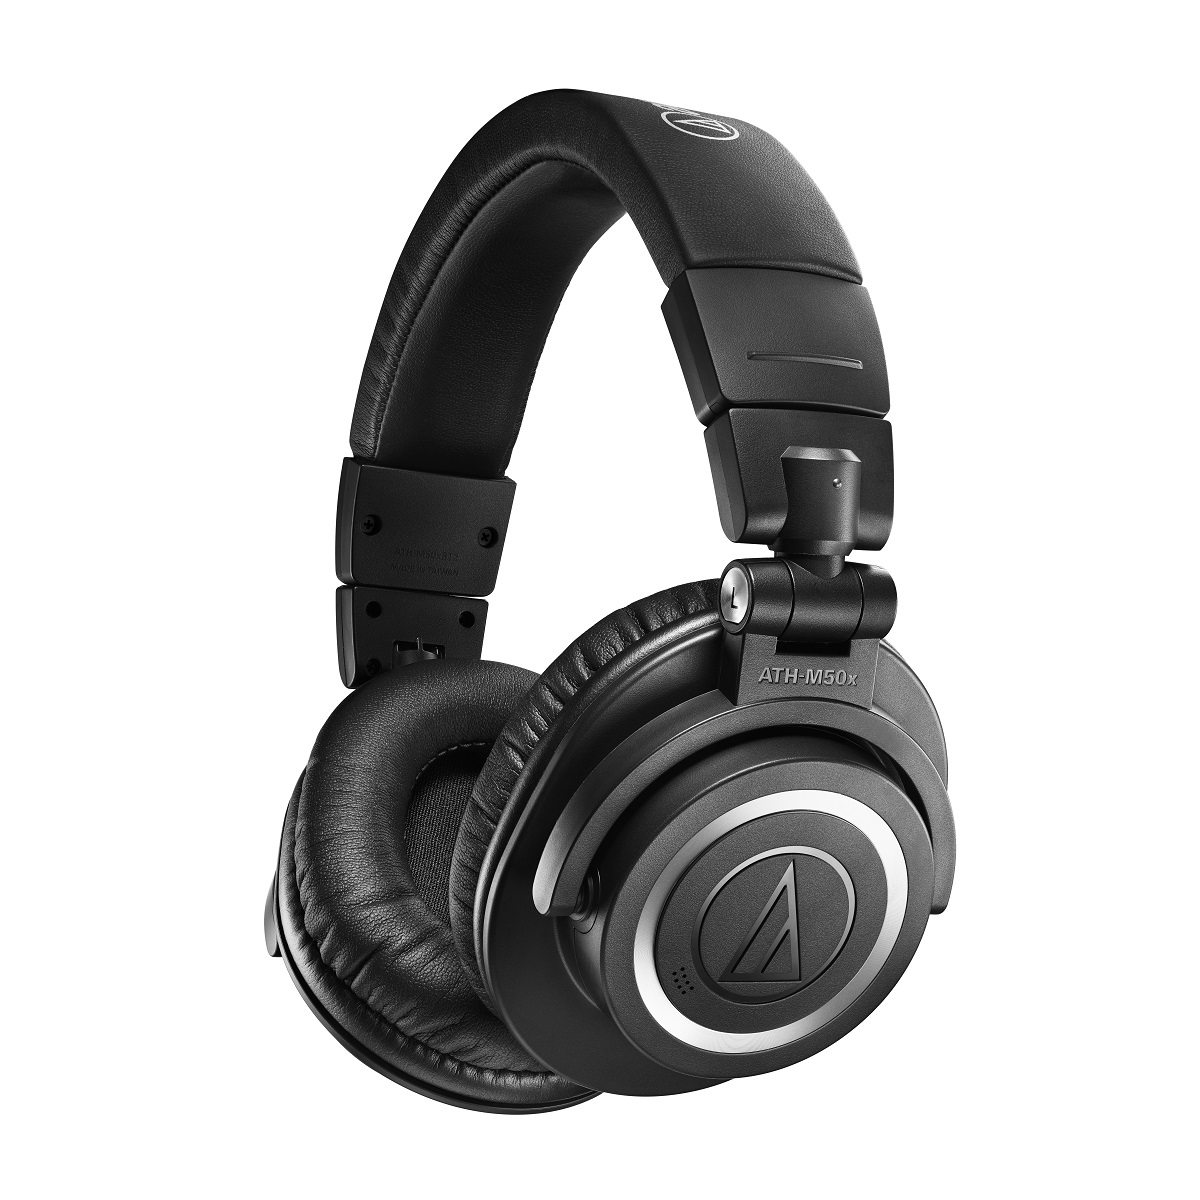 AudioTechnica ATH-M50xBT2 Wireless Over-Ear Headphones with Bluetooth (Black) - image 2 of 8